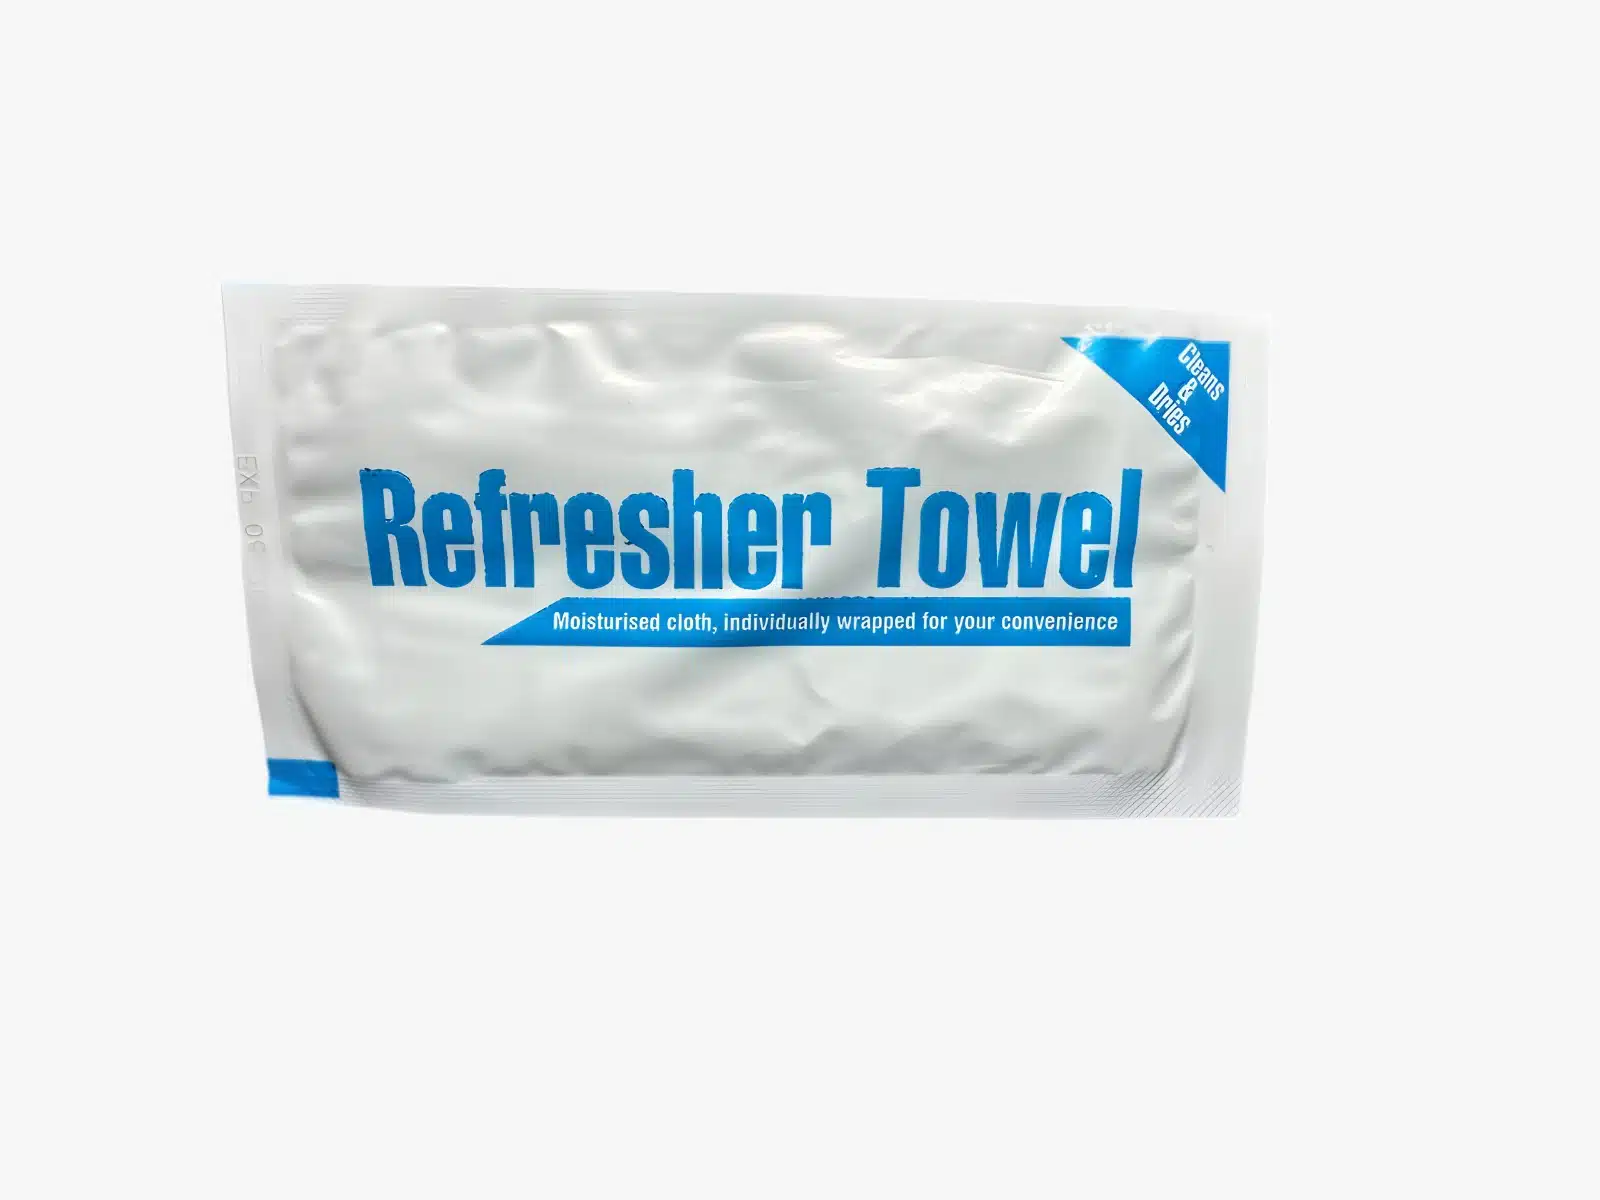 Refresher Towel